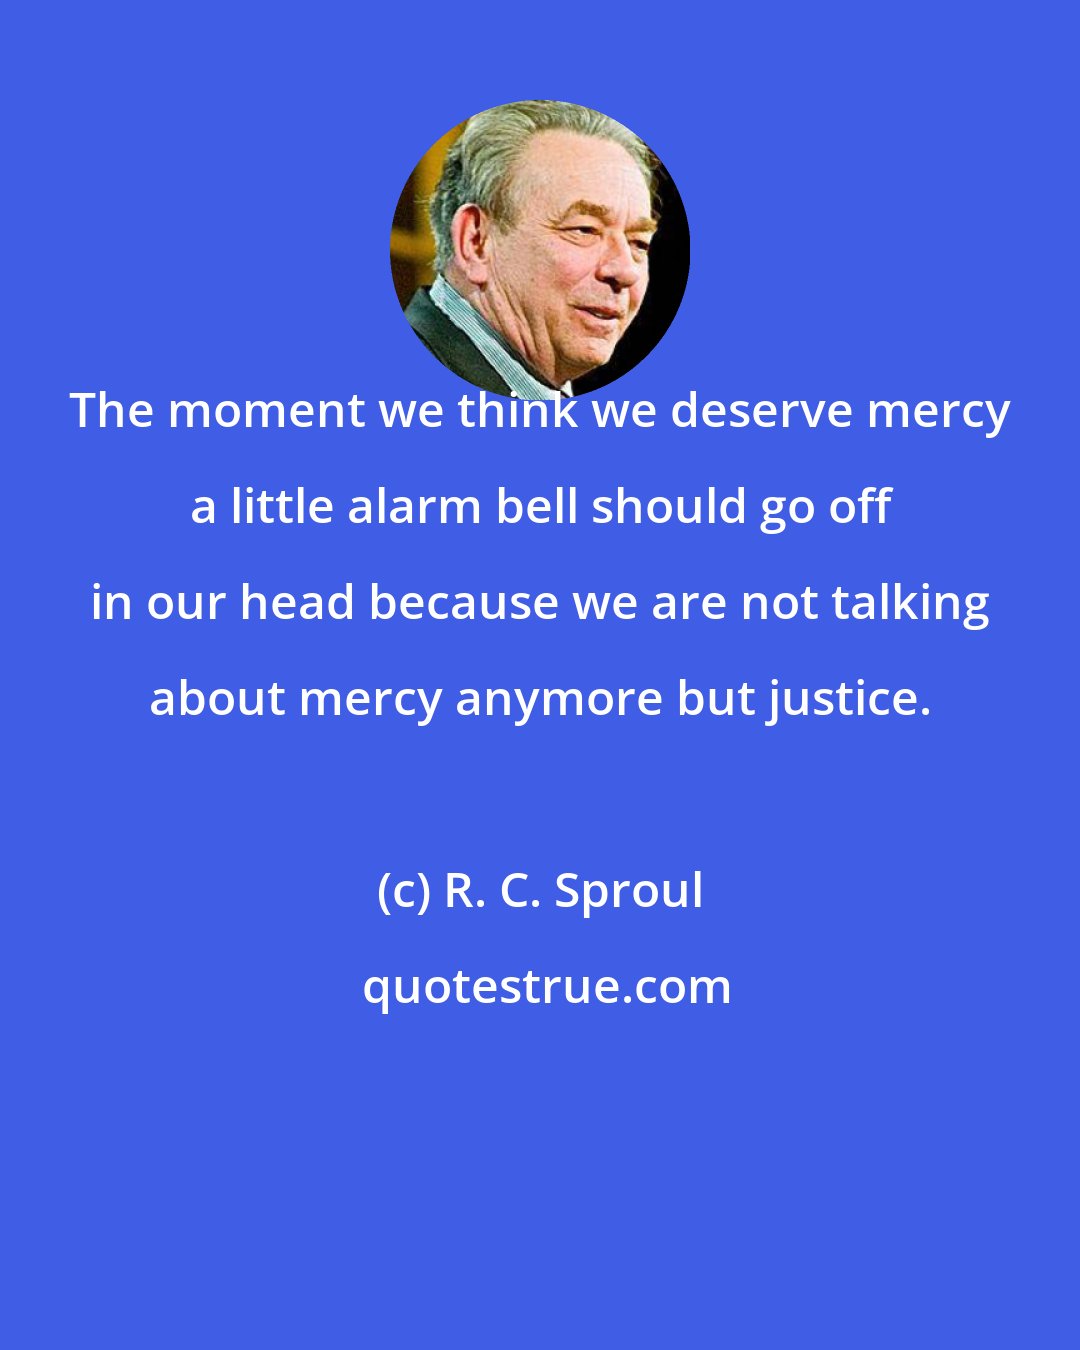 R. C. Sproul: The moment we think we deserve mercy a little alarm bell should go off in our head because we are not talking about mercy anymore but justice.